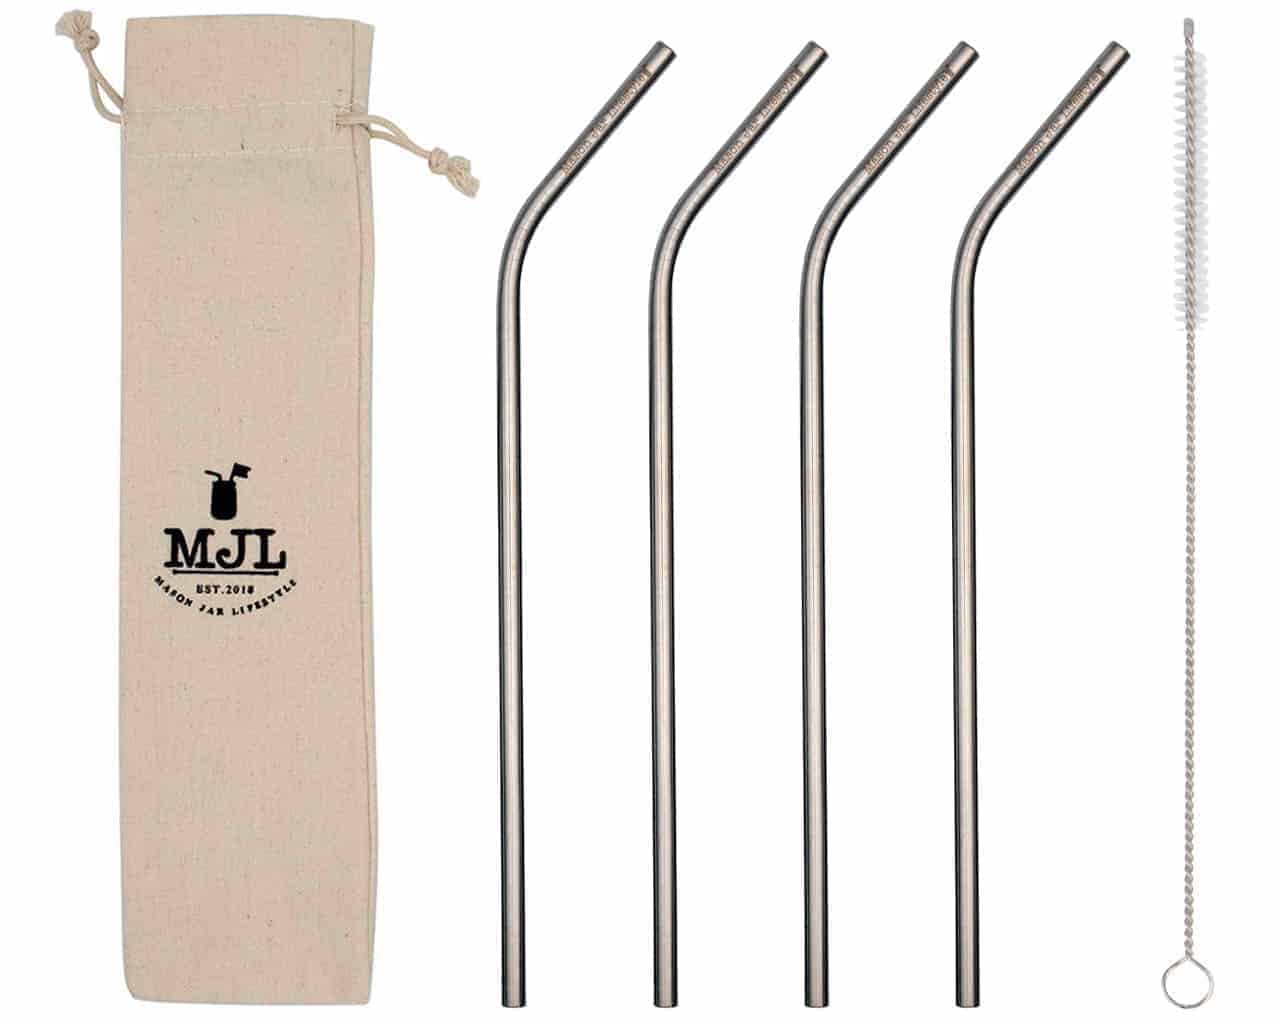 Stainless Steel Reusable Straws, 9.5-inches Straight Metal Straw for  Drinking Hot and Cold Beverages, Designed with Stopper, Set of 6 Metal  Straws 